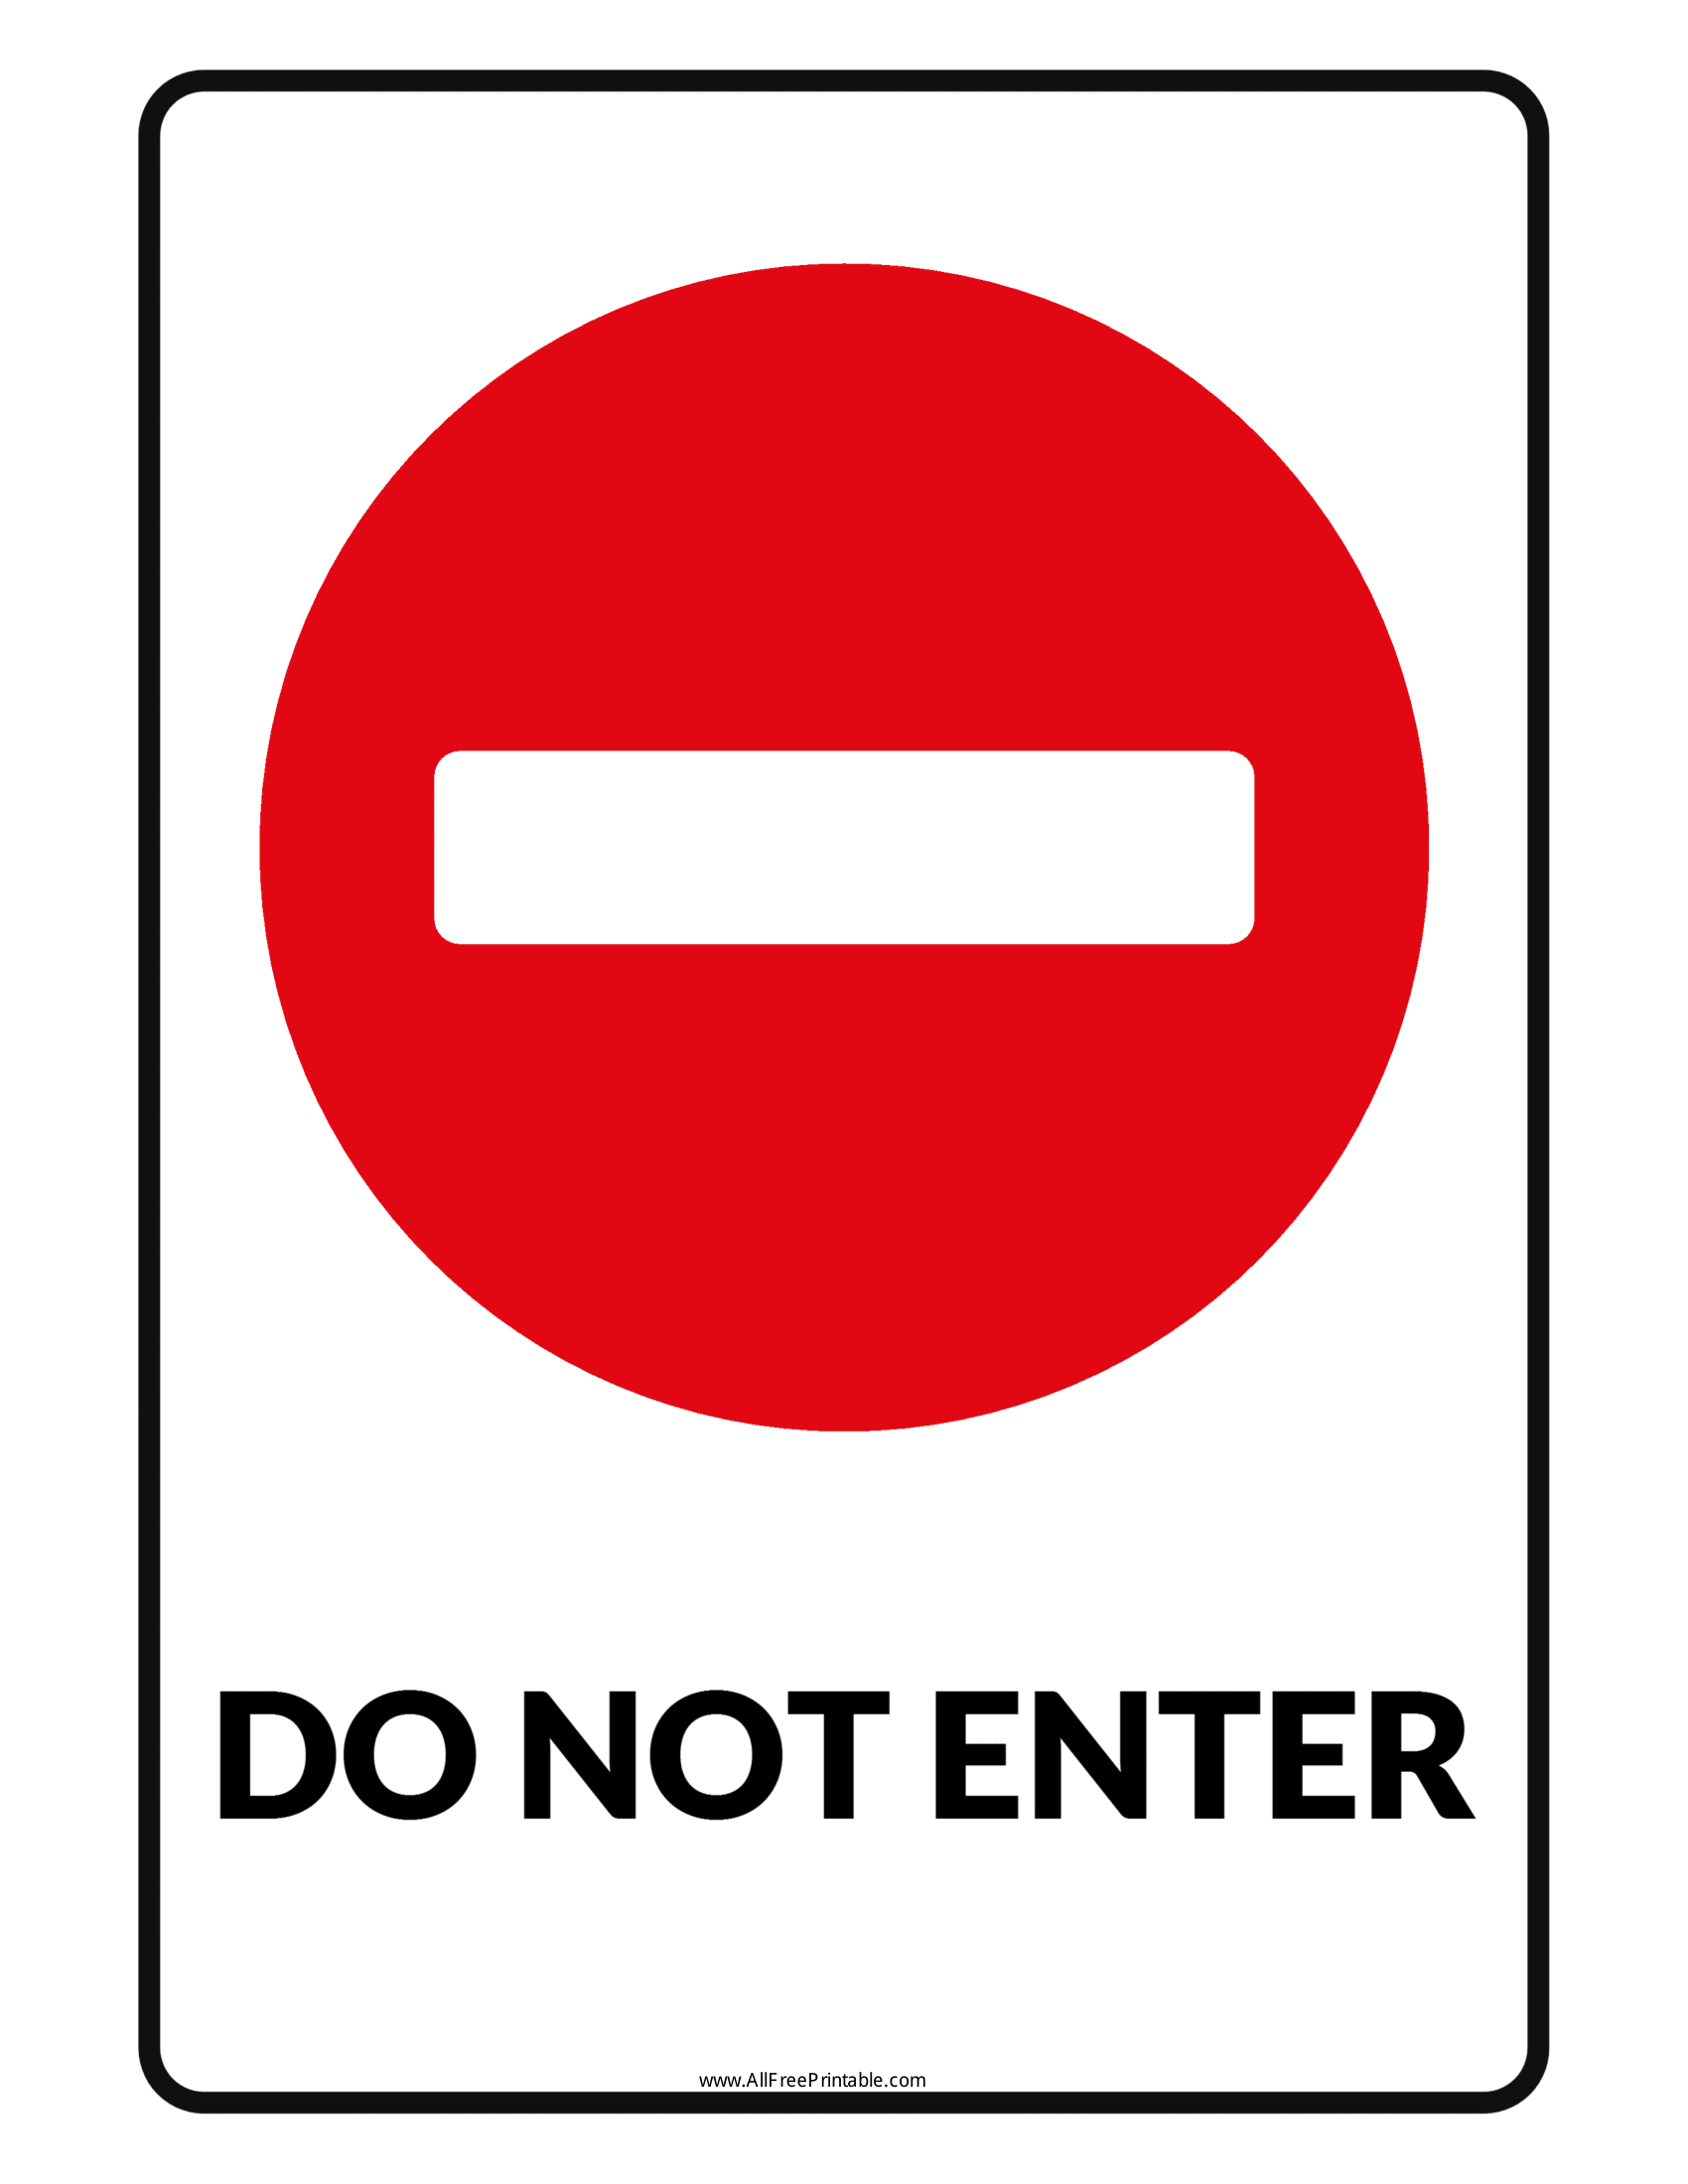 no-entry-signs-poster-template-free-printable-no-entry-sign-free-printable